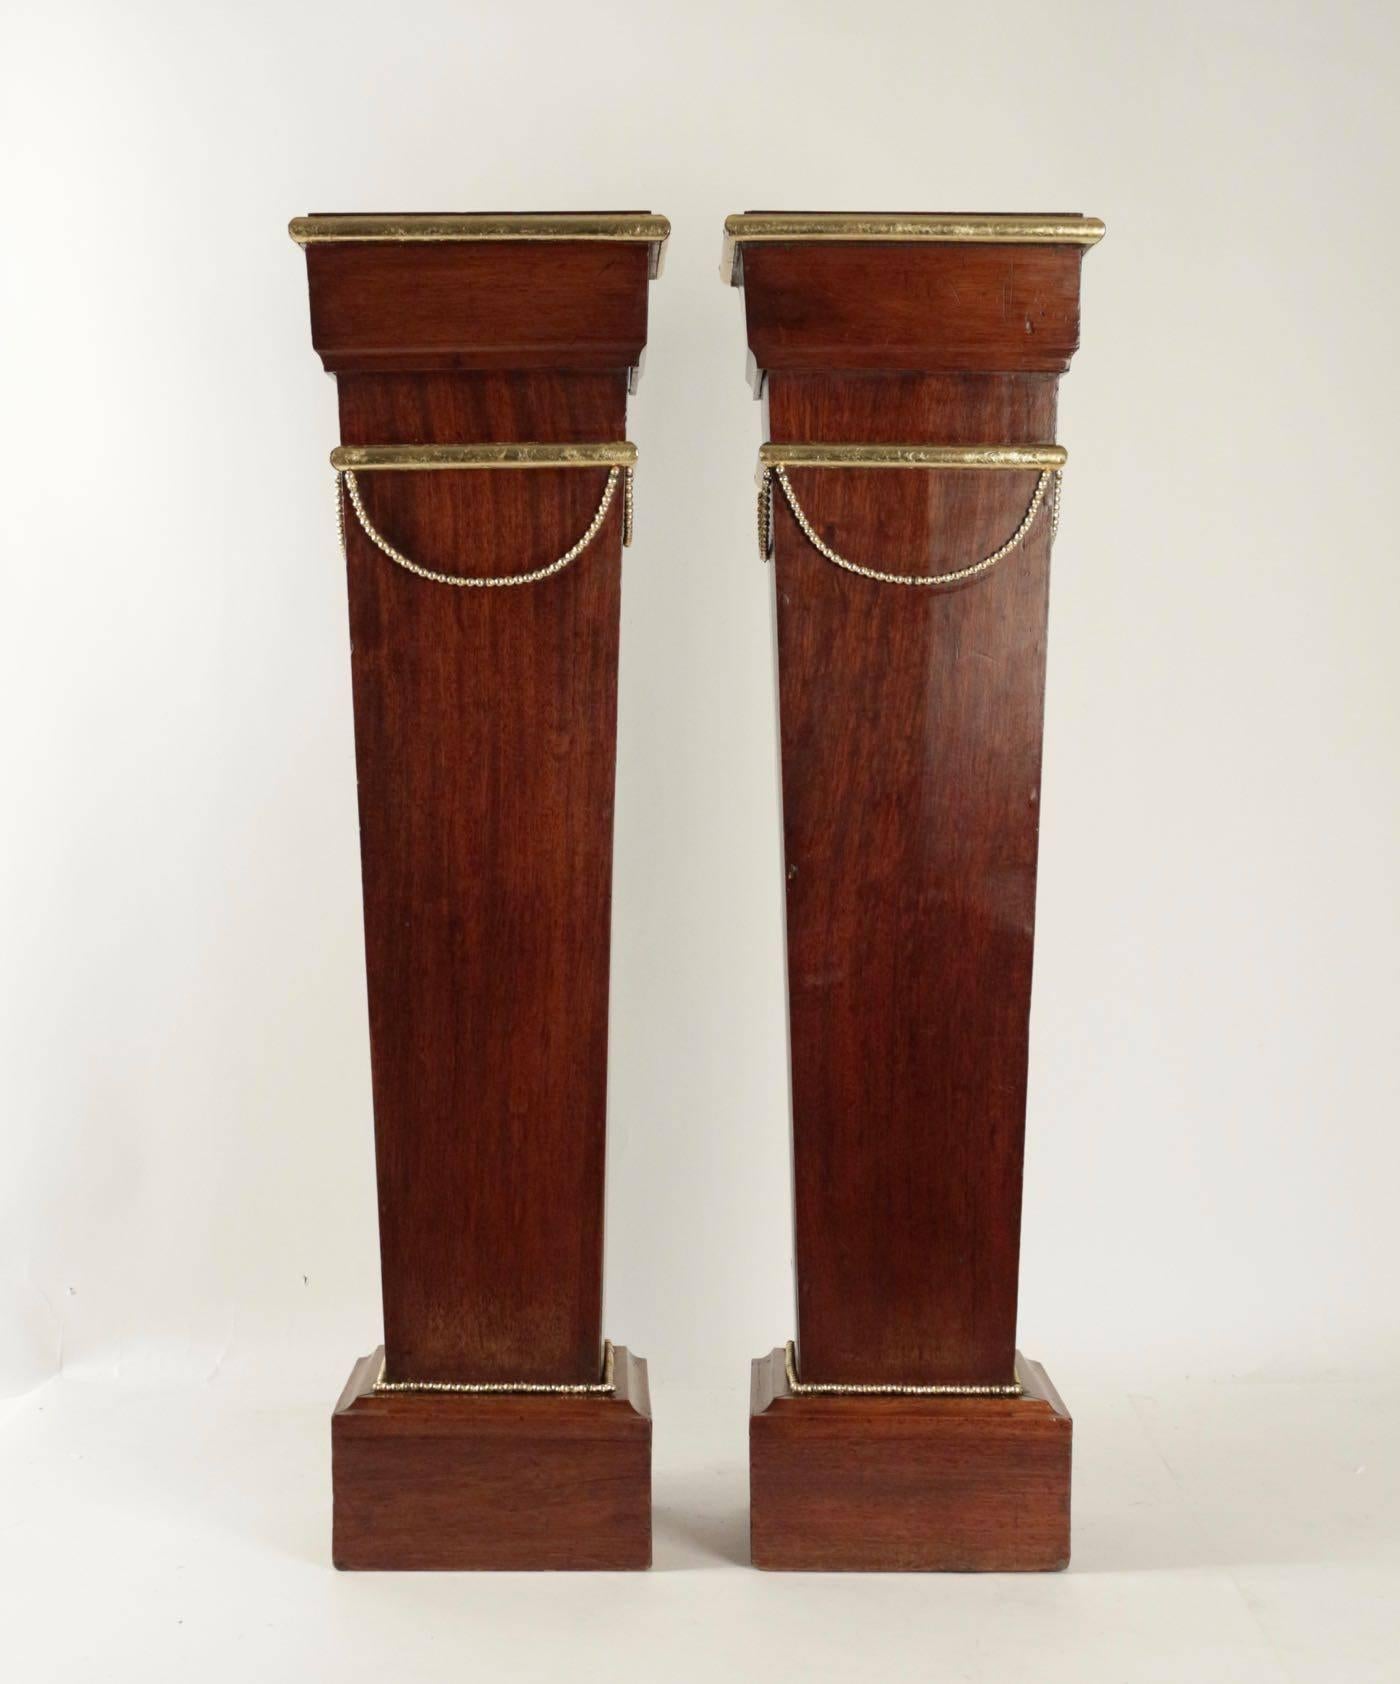 Gilt Pair of Sheaths, Consoles, Mahogany, Golden at the Gold Leaf, 19th Century For Sale